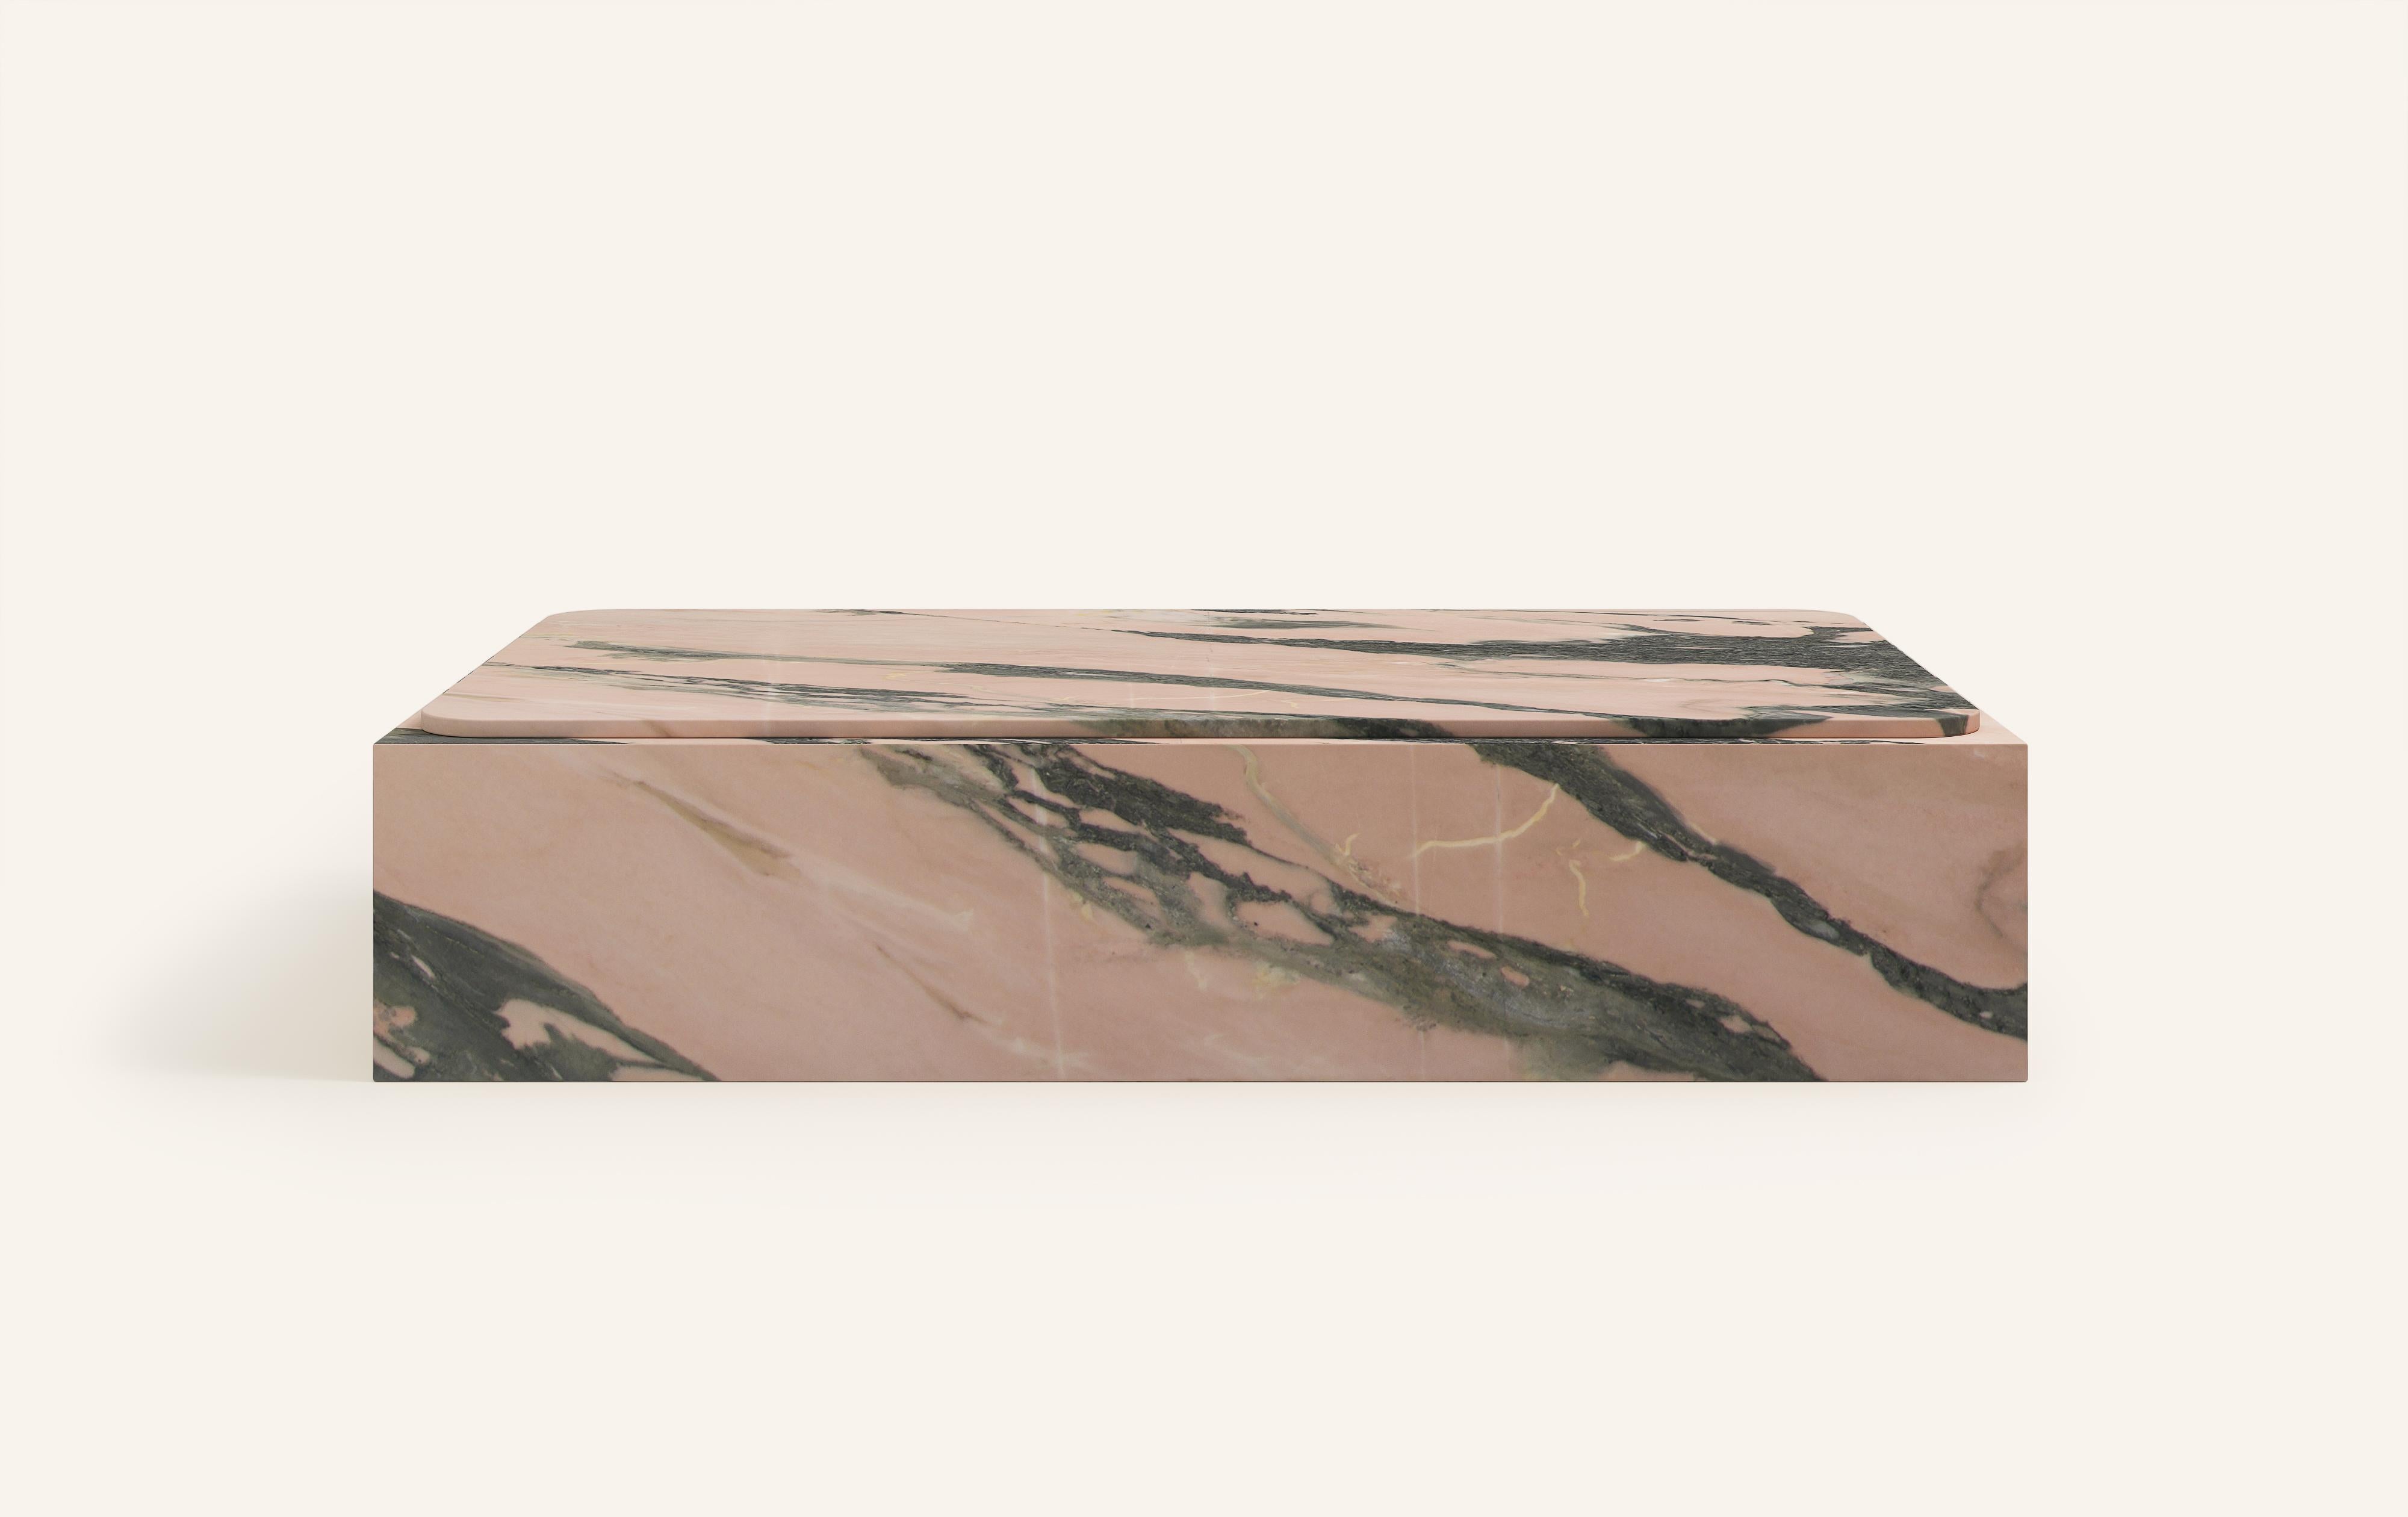 MONOLITHIC FORMS SOFTENED BY GENTLE EDGES. WITH ITS BOLD MARBLE PATTERNS CUBO IS AS VERSATILE AS IT IS STRIKING.

DIMENSIONS:
60”L x 36”W x 13”H: 
- 3/4